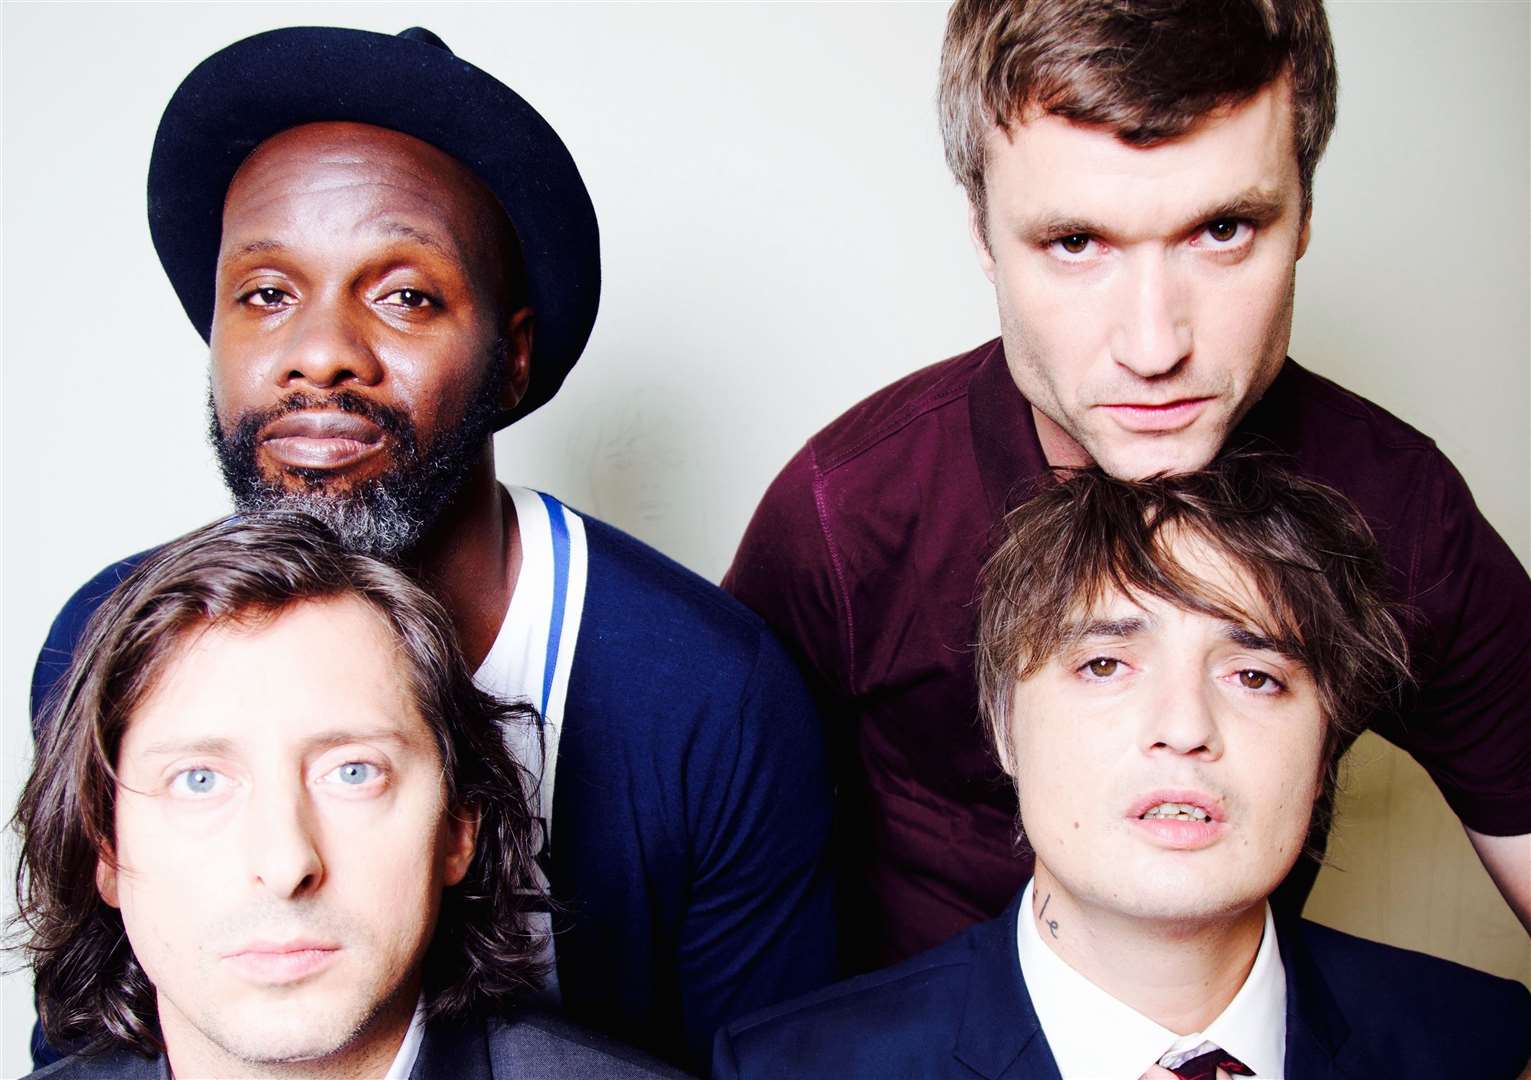 The Libertines will play in Margate this winter